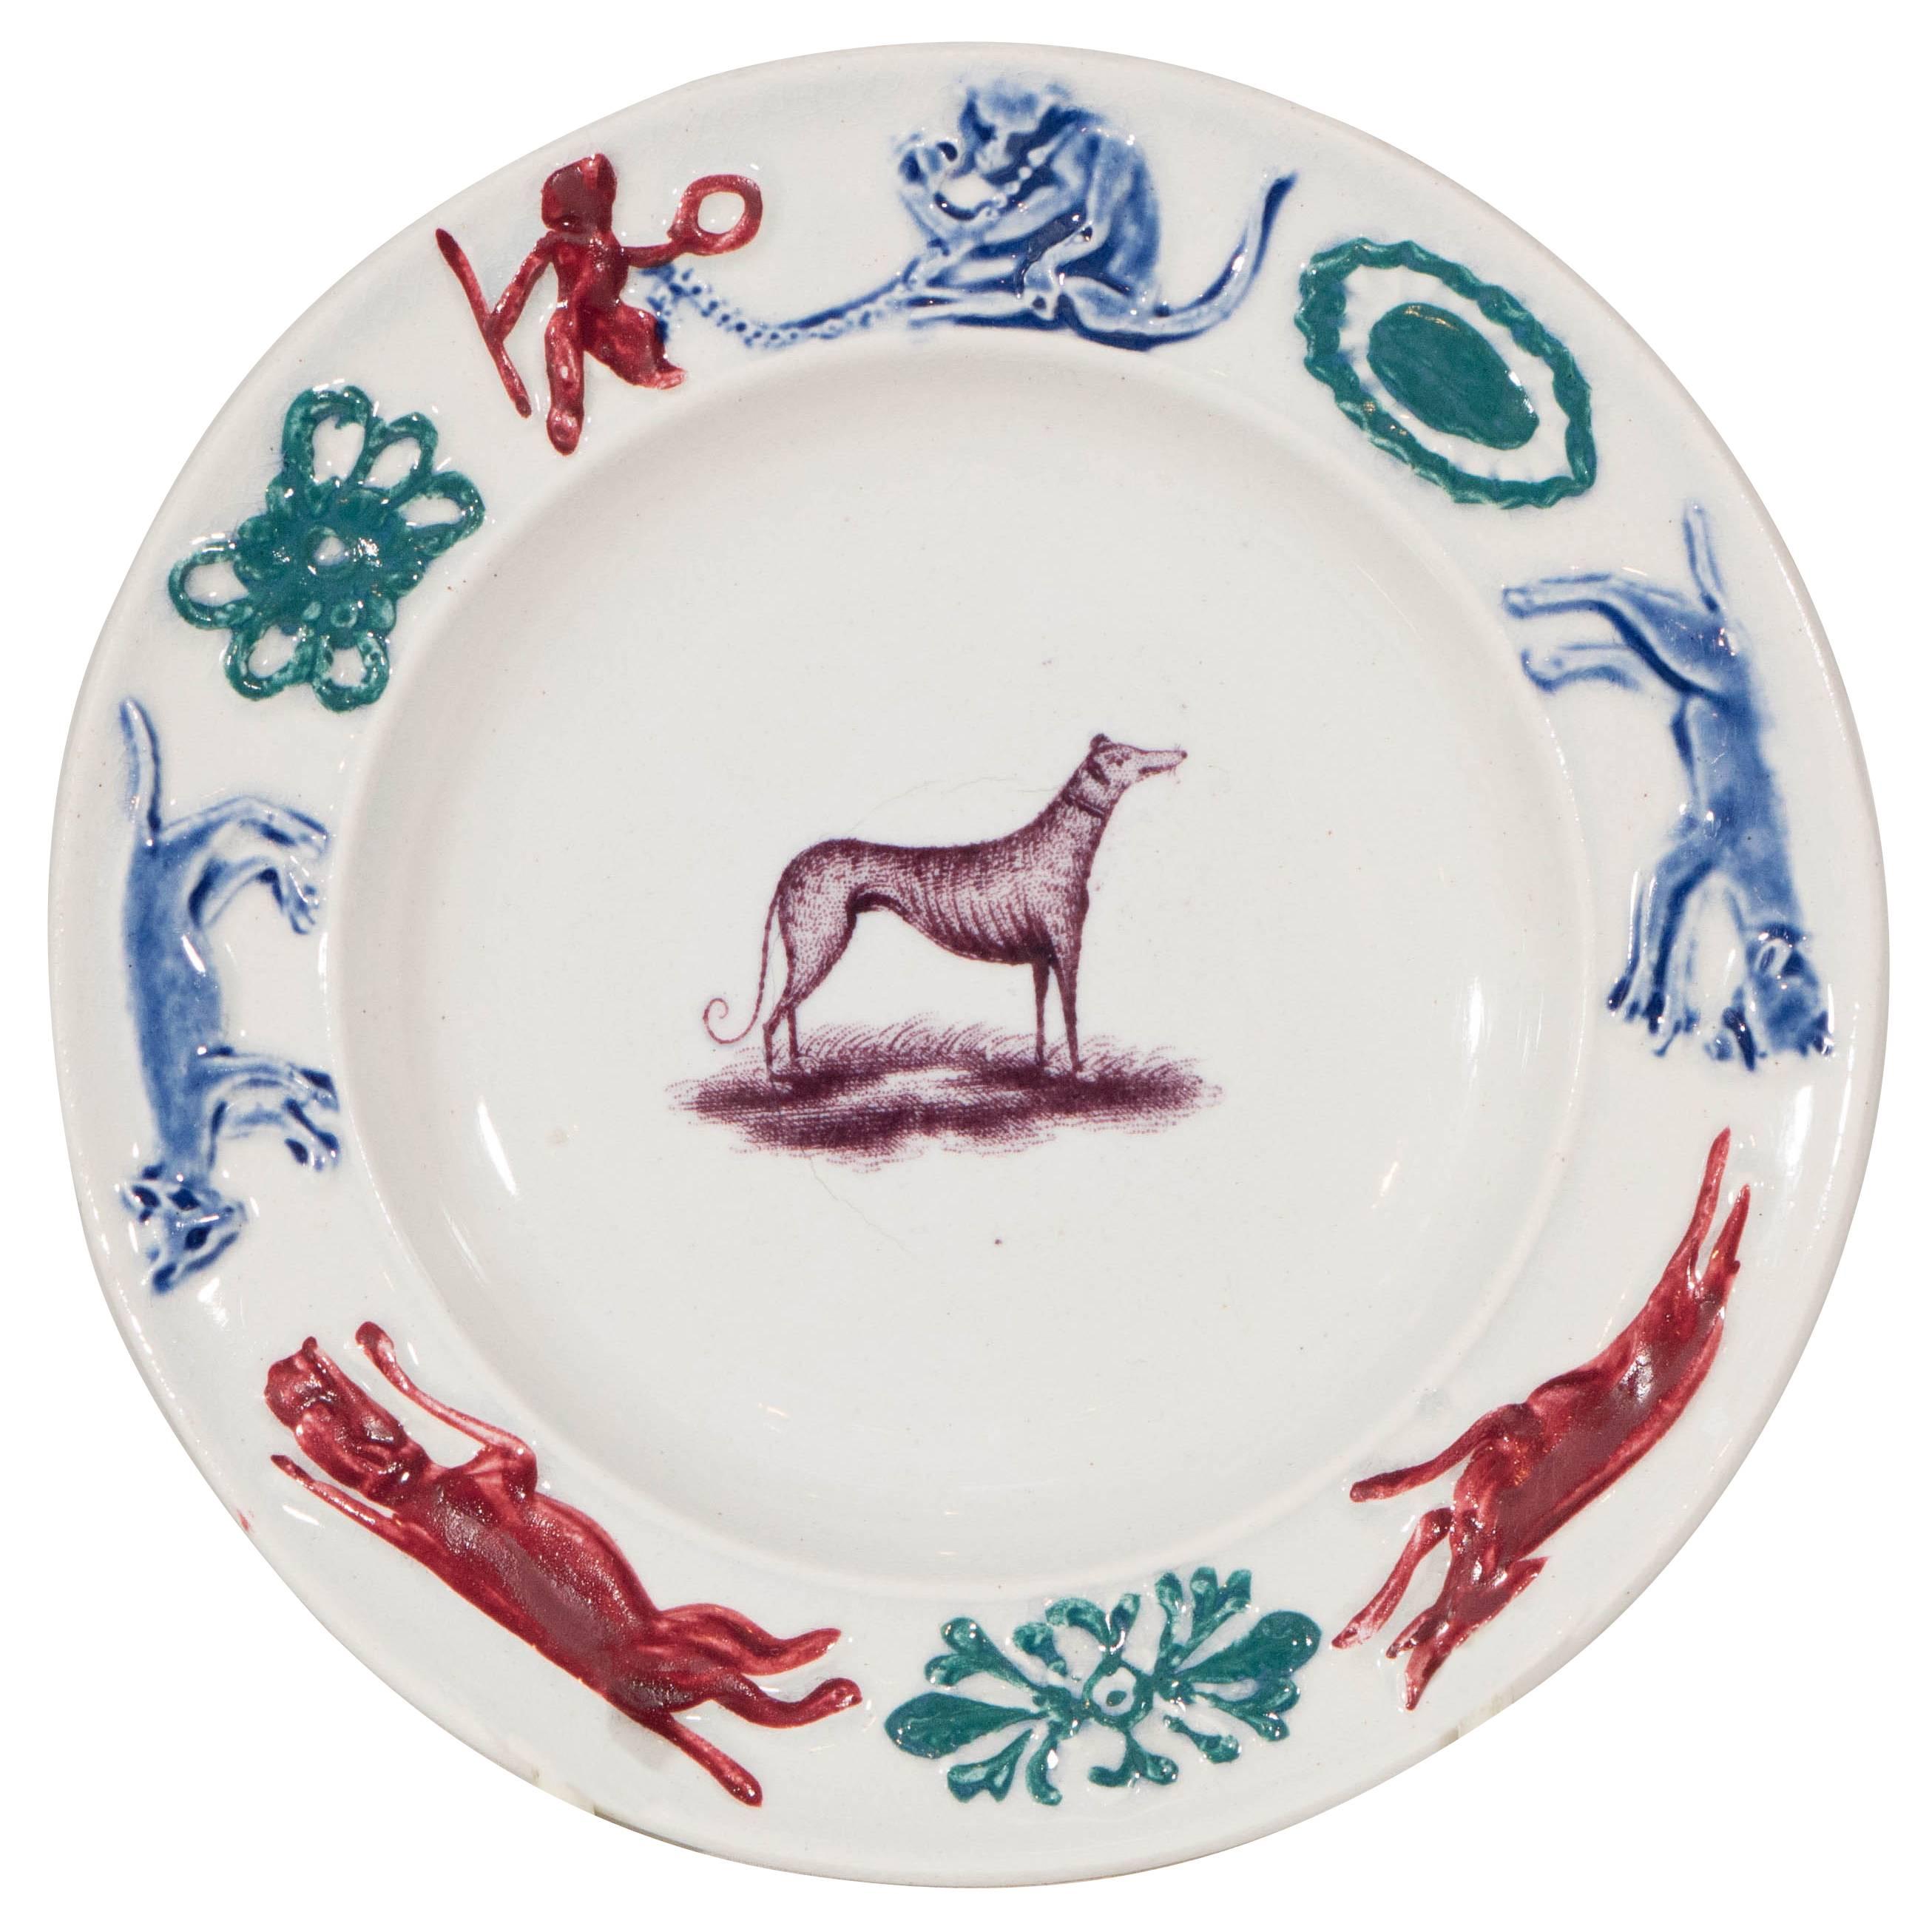  Antique Staffordshire Pottery Child's Plate Decorated with a Dog Monkey and Fox